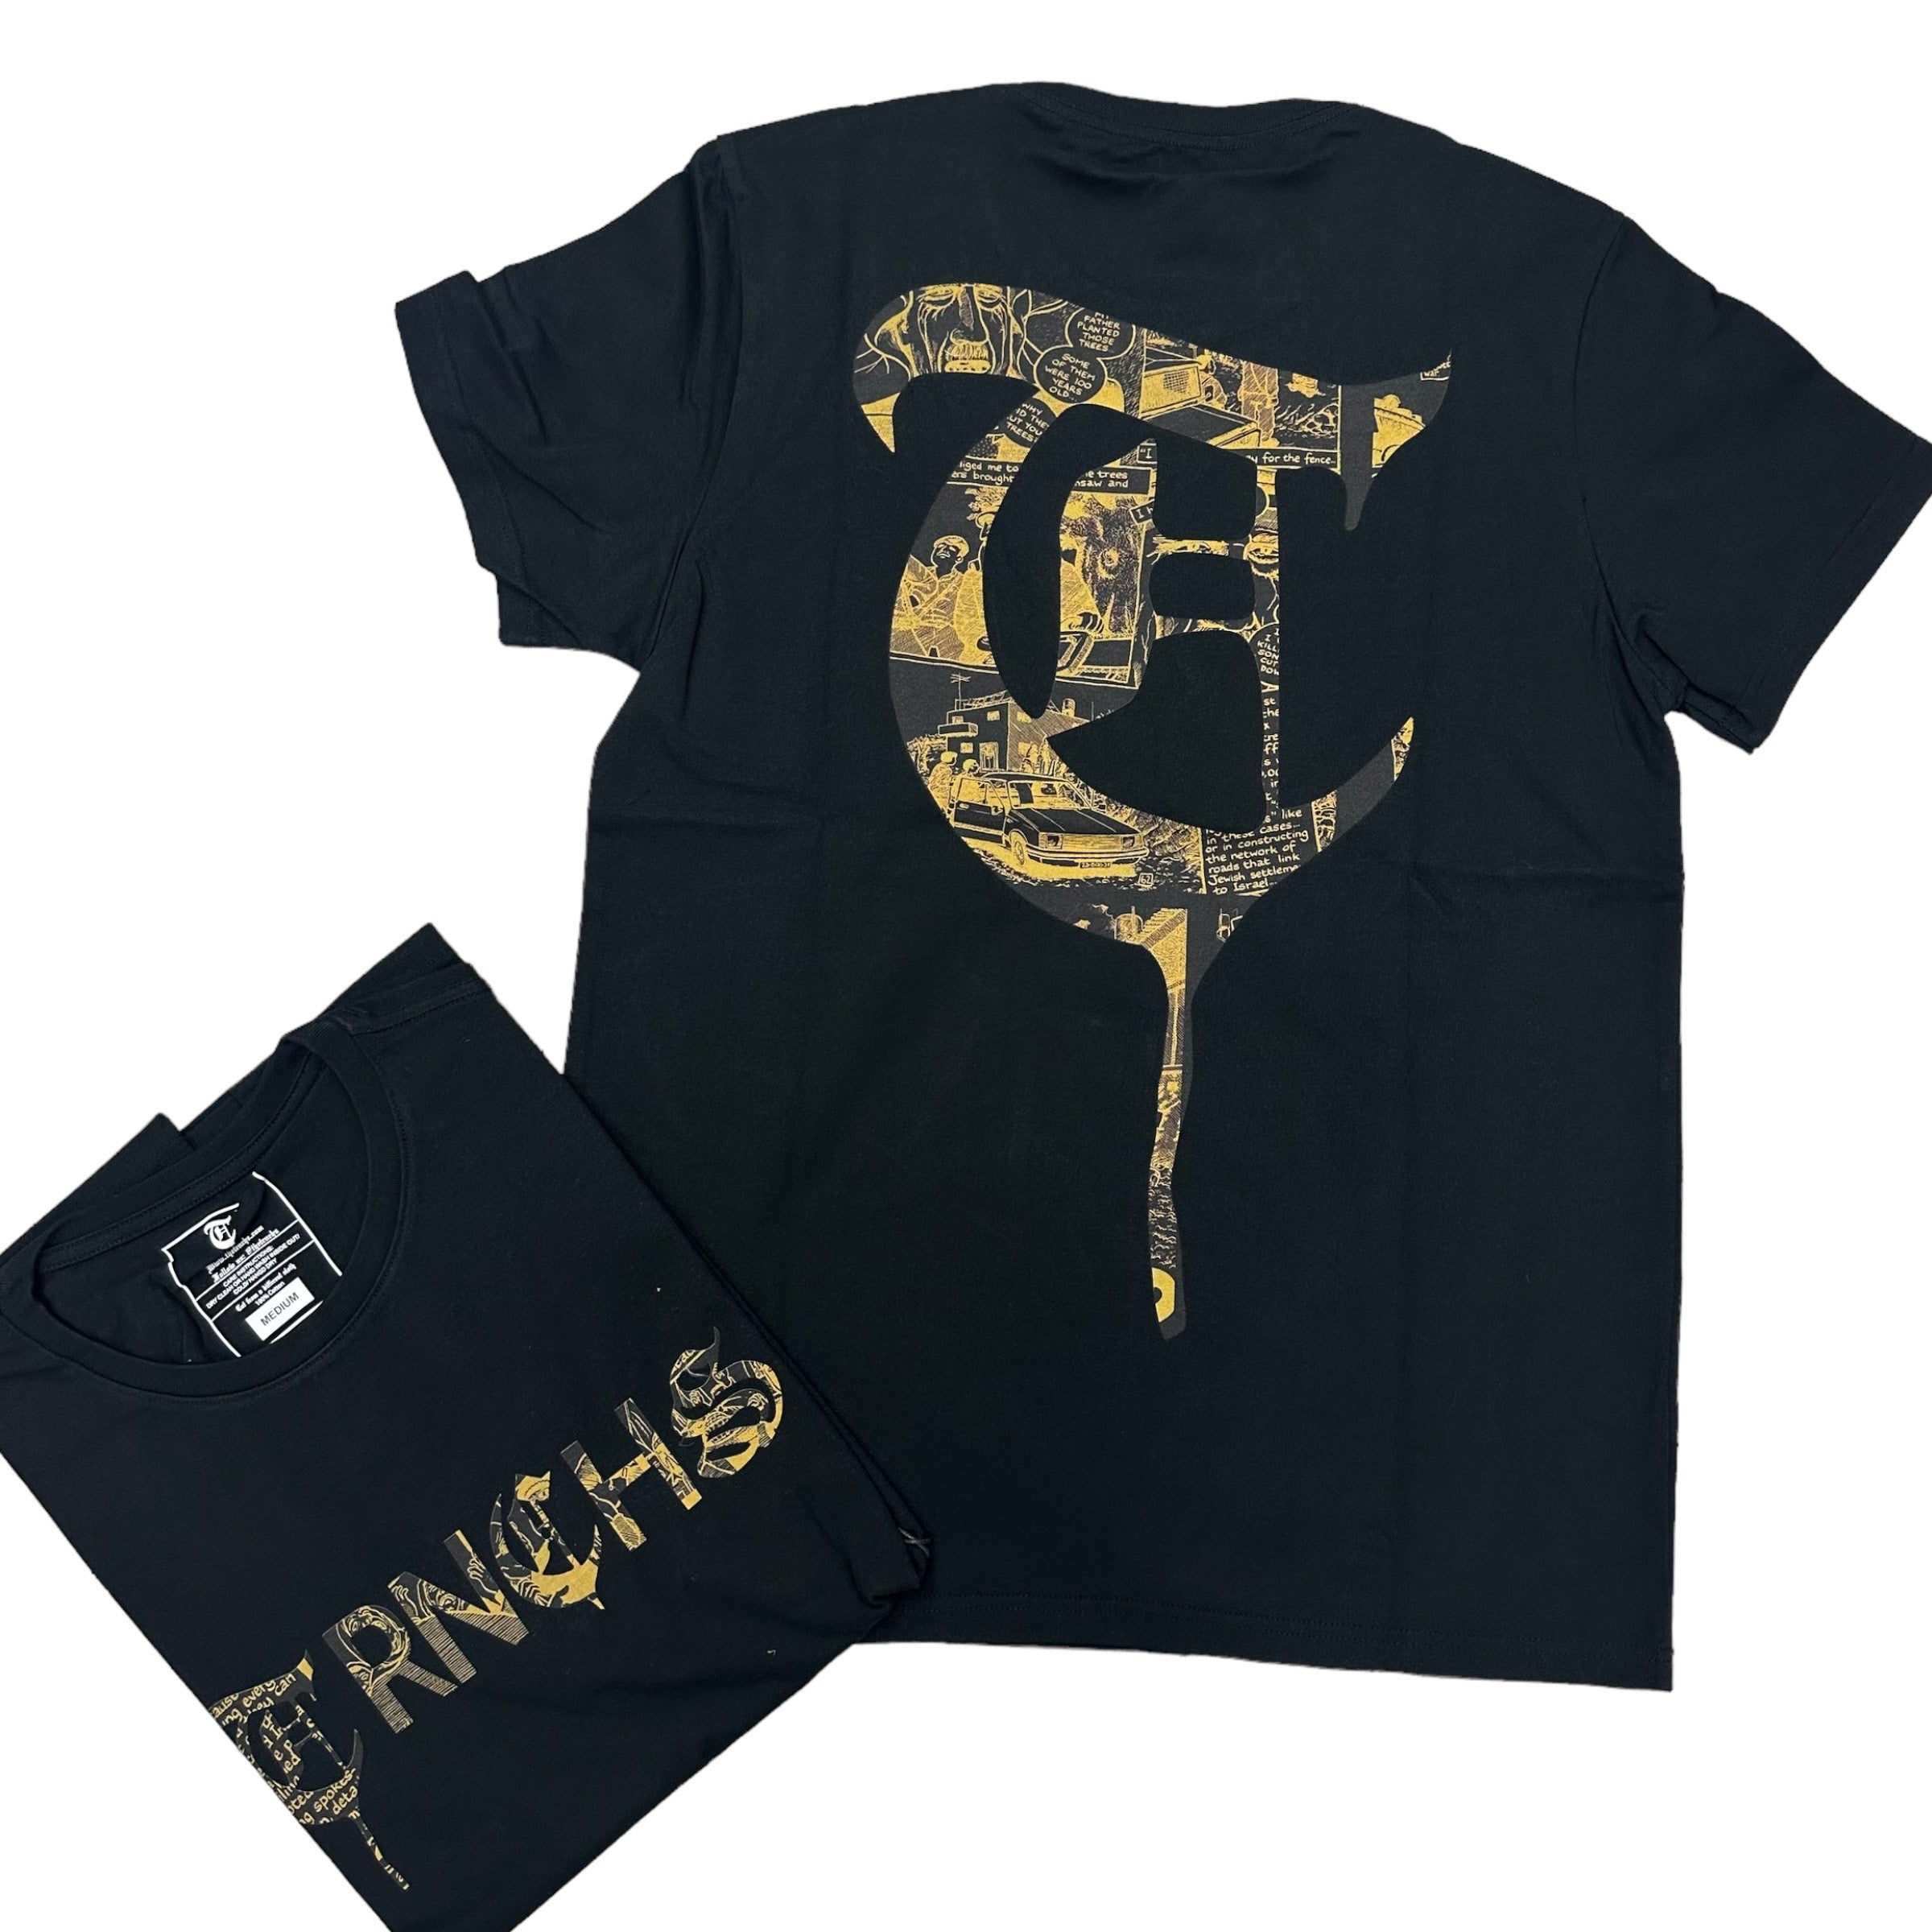 Trnchs Classic "T"  Vintage Oversize Tee Black/Gold